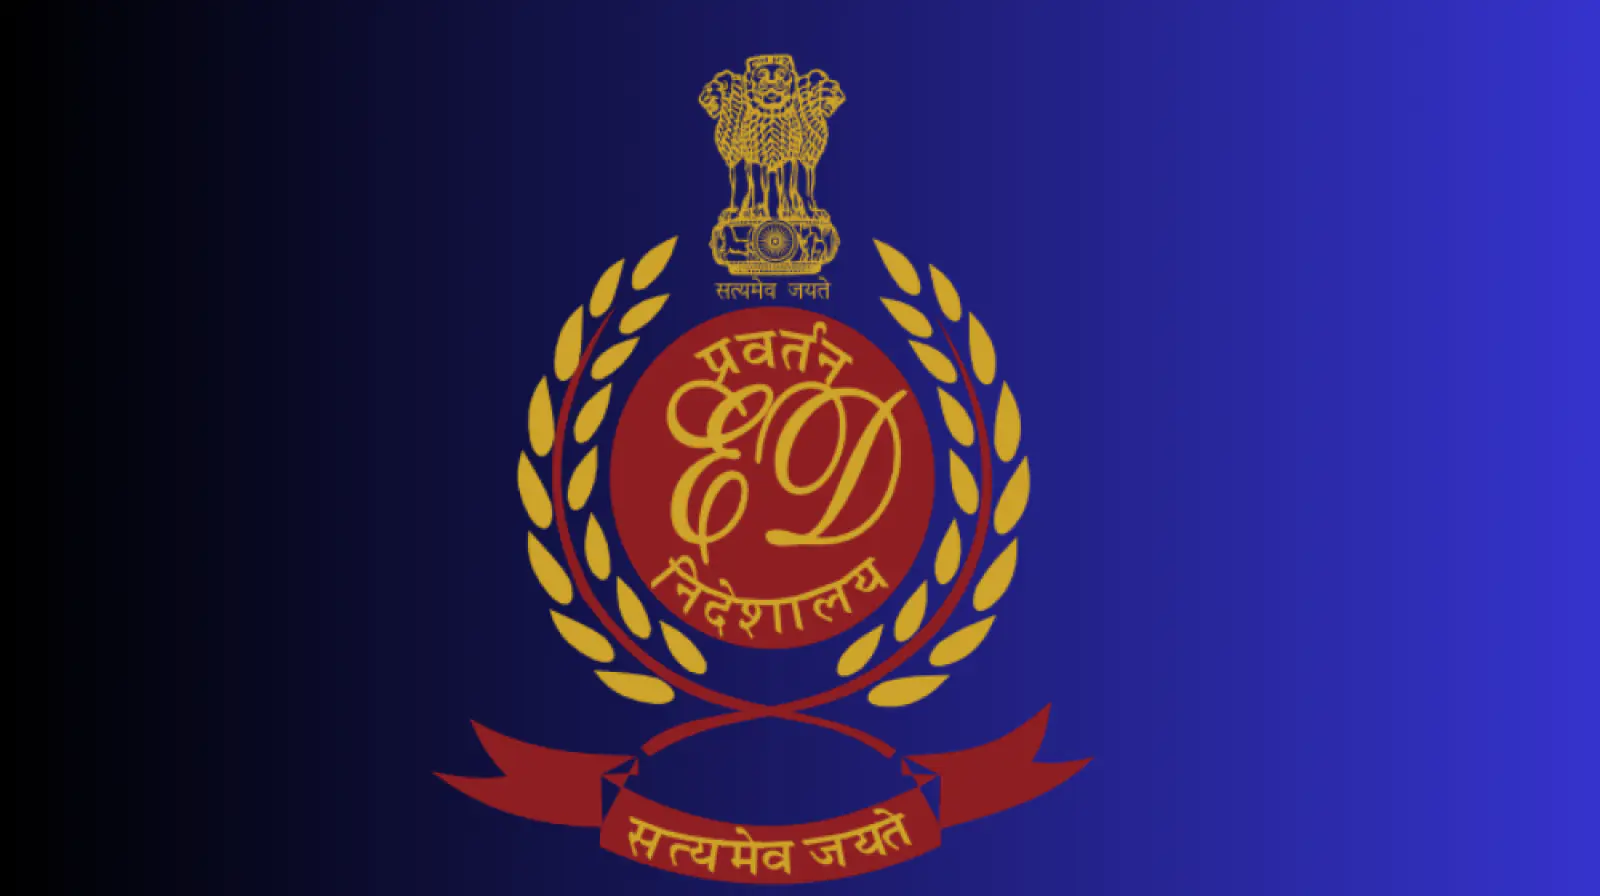 Looted Rs 1.69 crore by pretending to be ED officer, also stole luxury car and expensive mobile